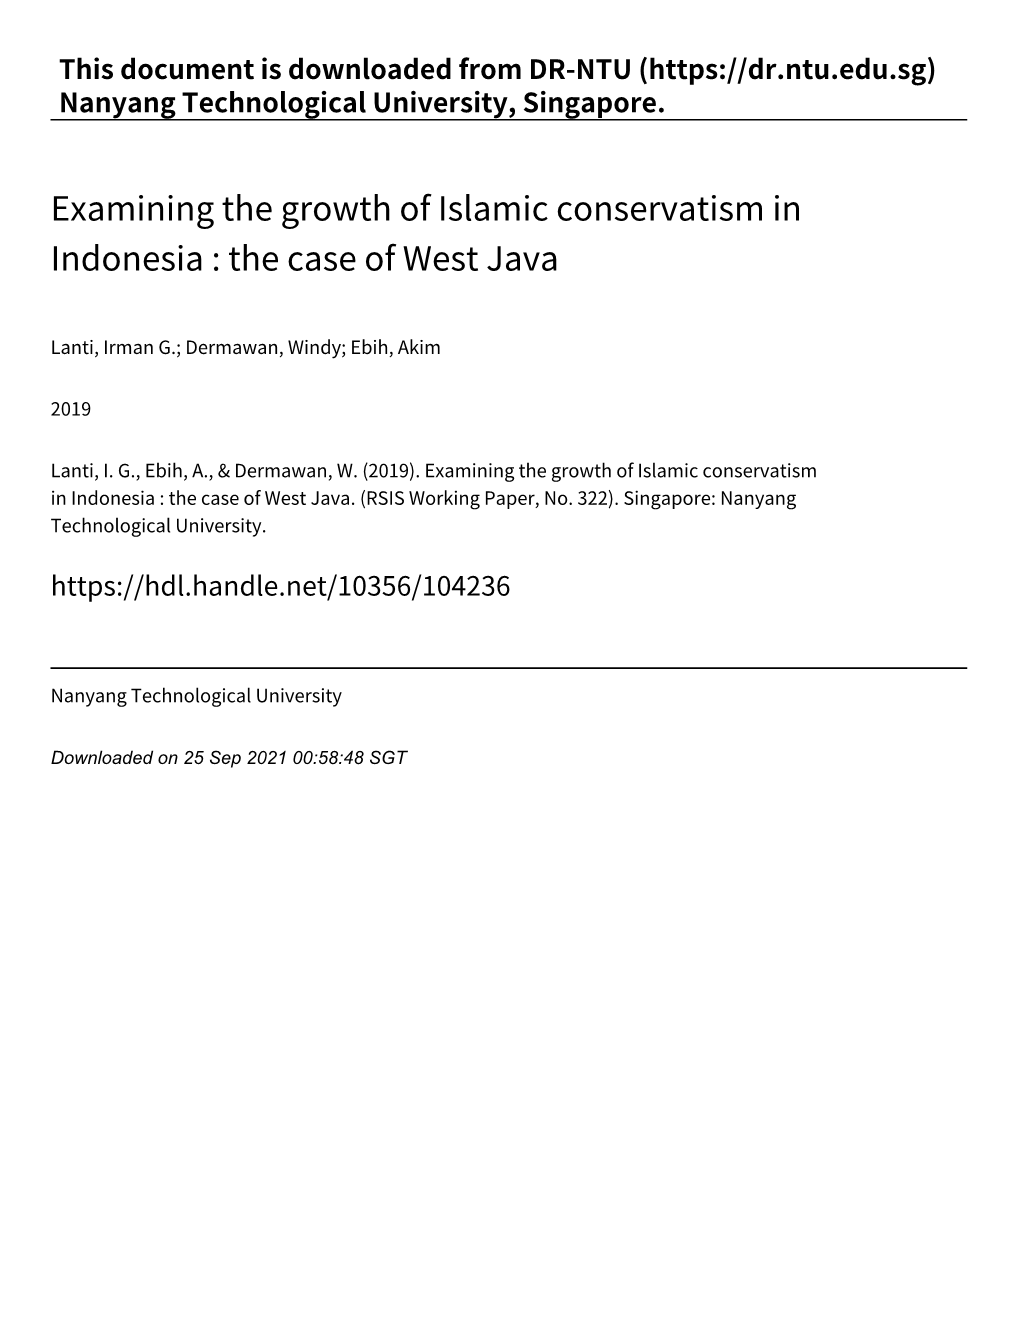 Examining the Growth of Islamic Conservatism in Indonesia : the Case of West Java